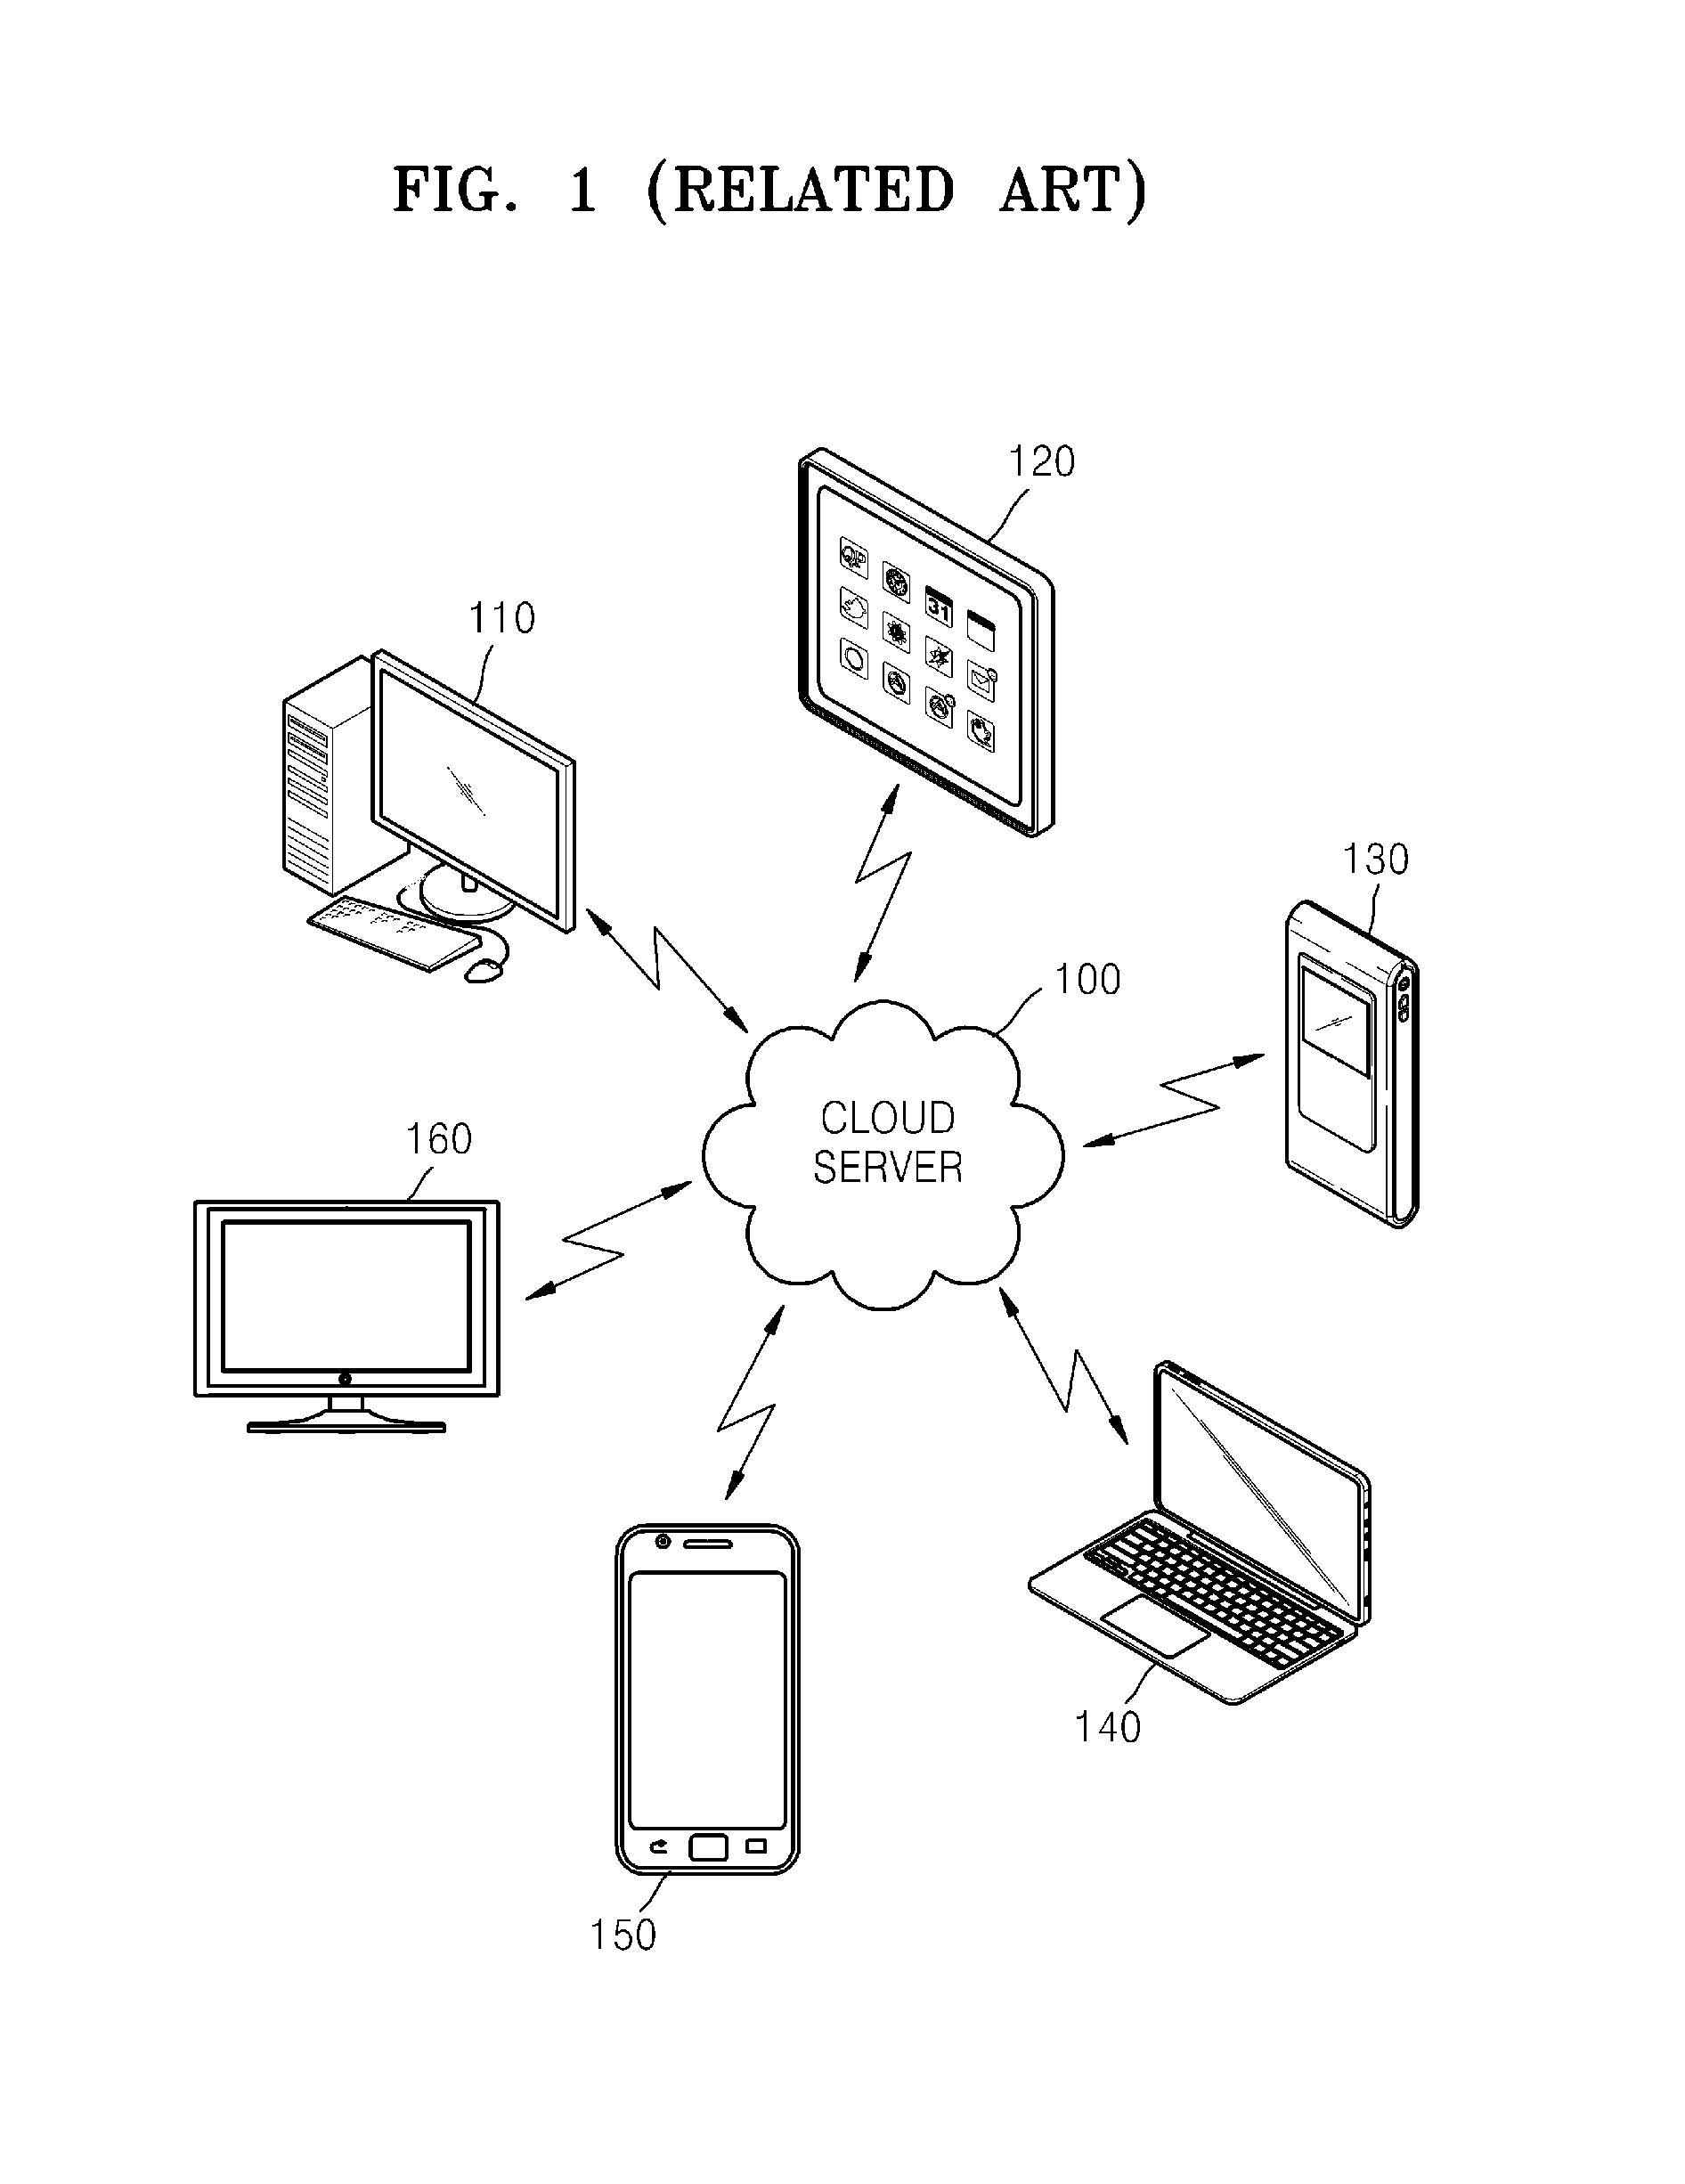 Method and apparatus for selectively providing protection of screen information data